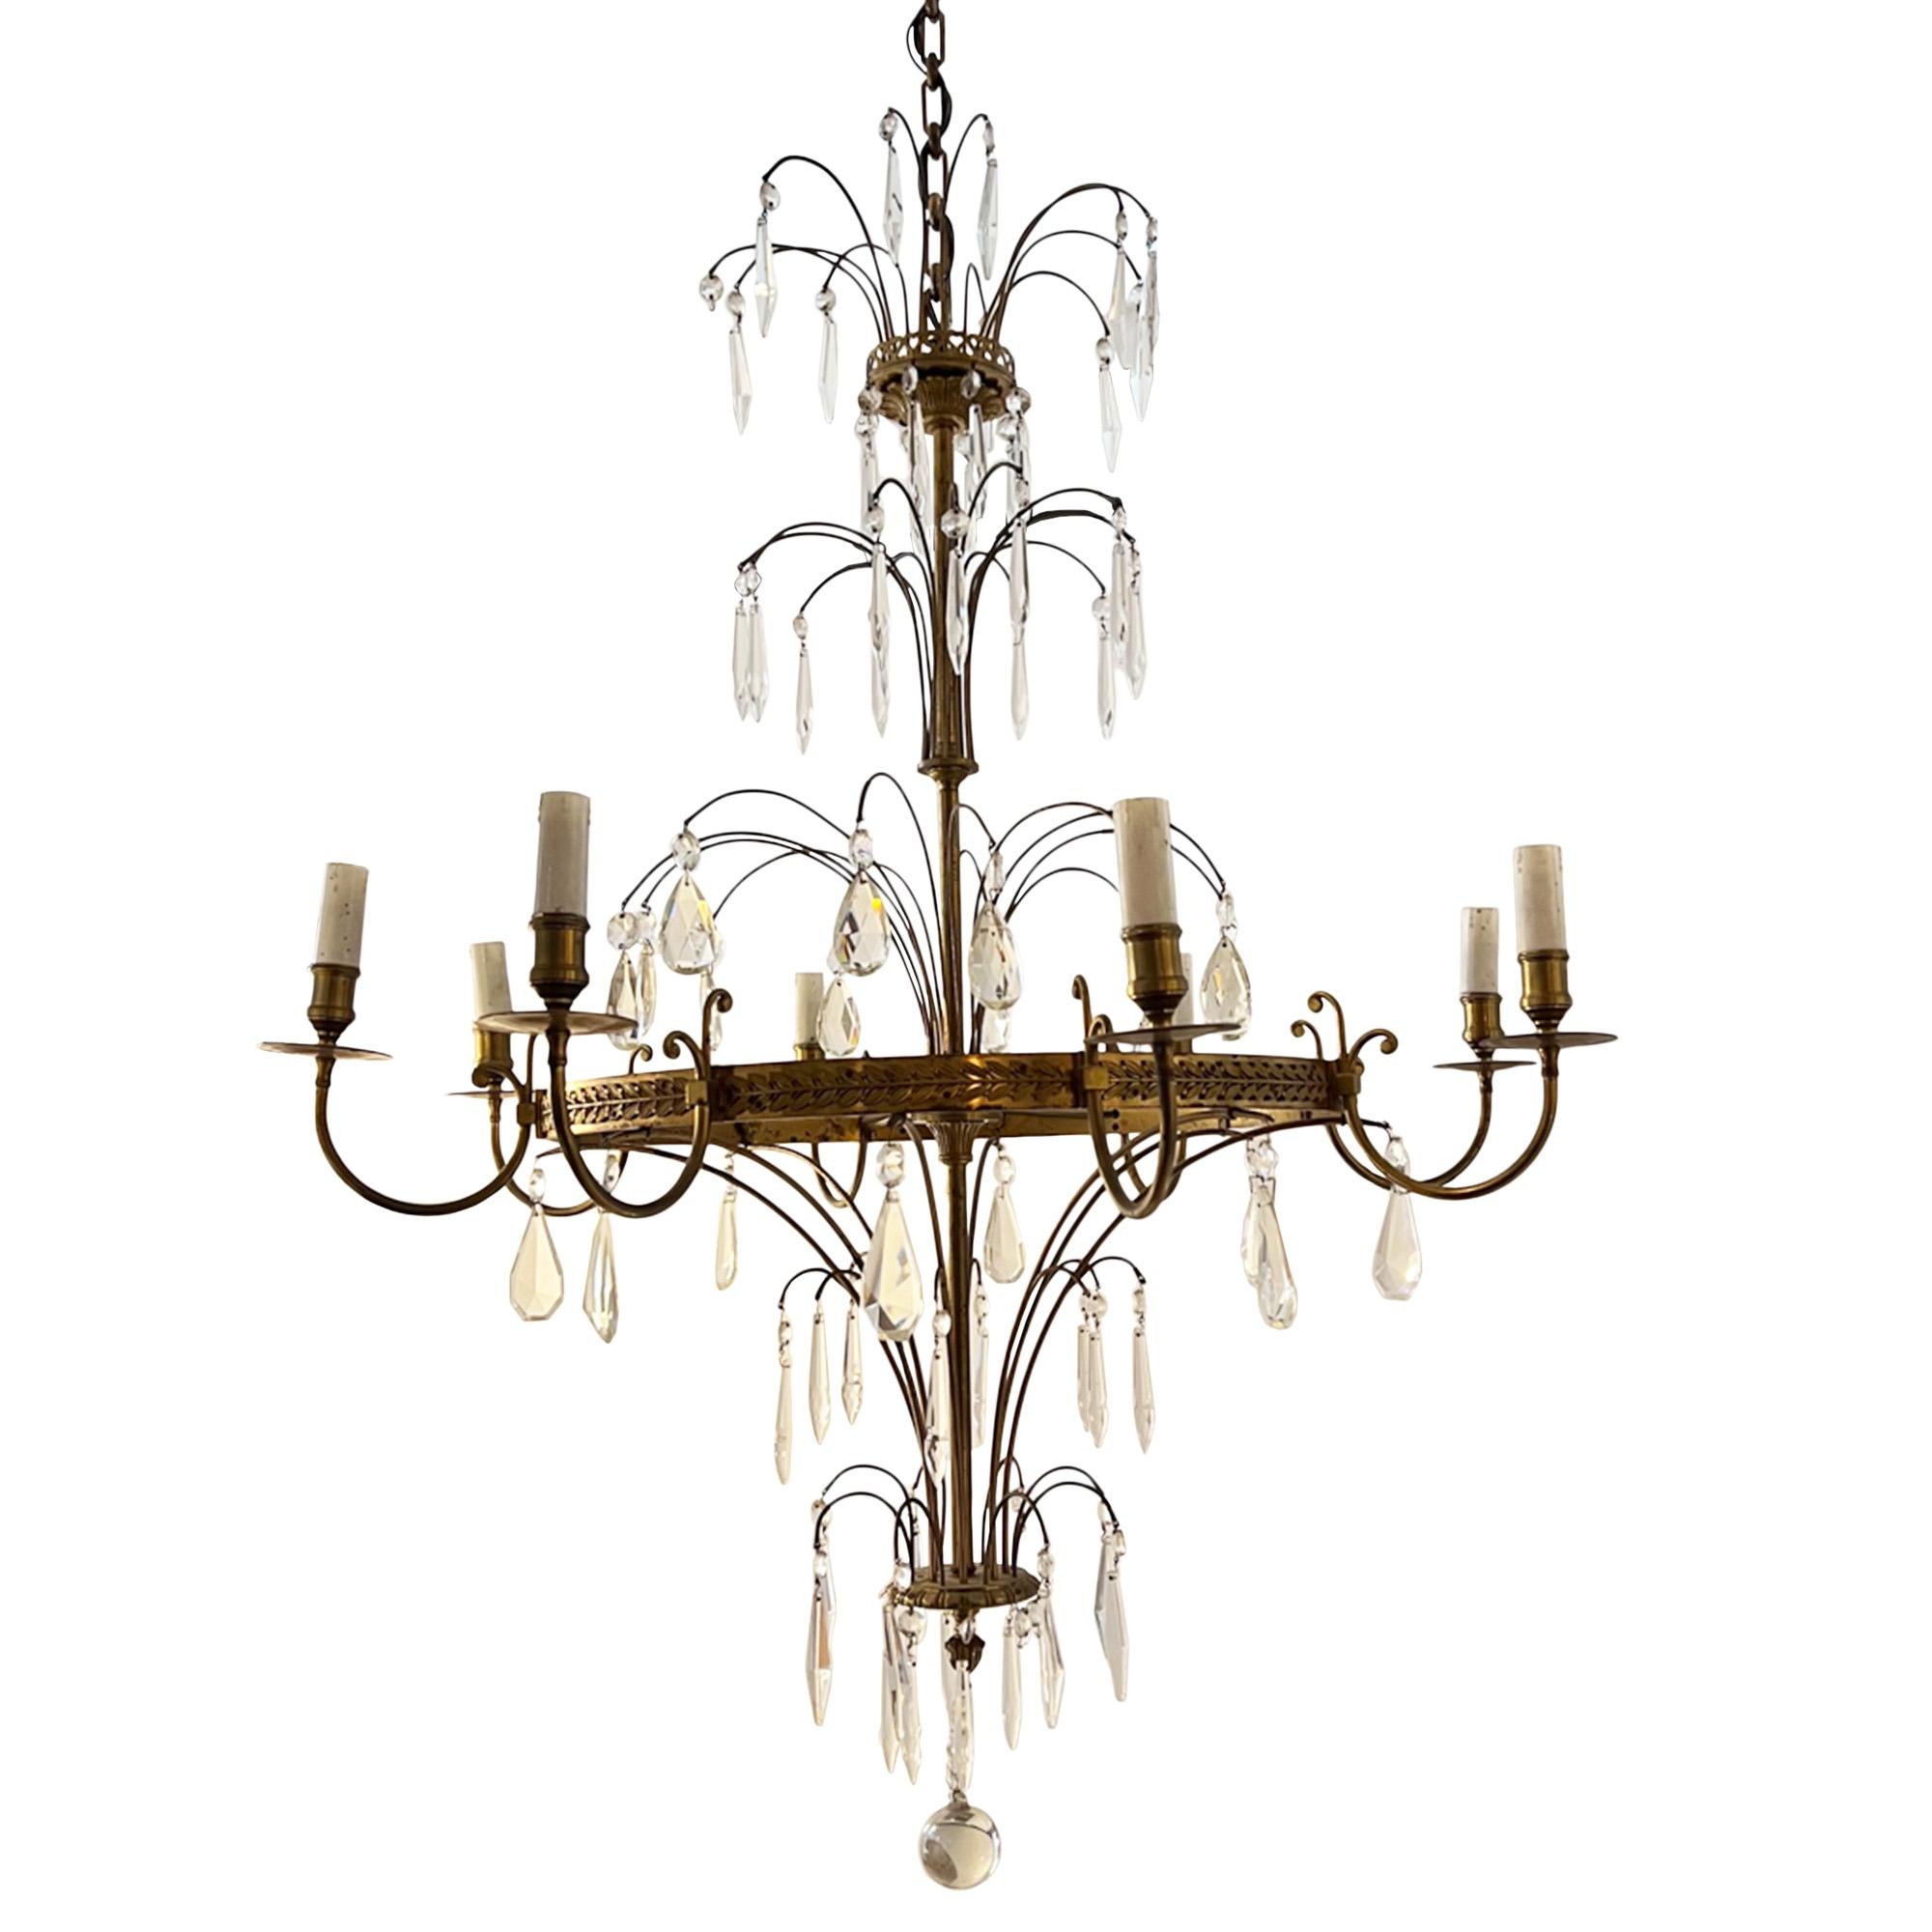 Mid-20th Century Elegant French 1950s Chandelier For Sale